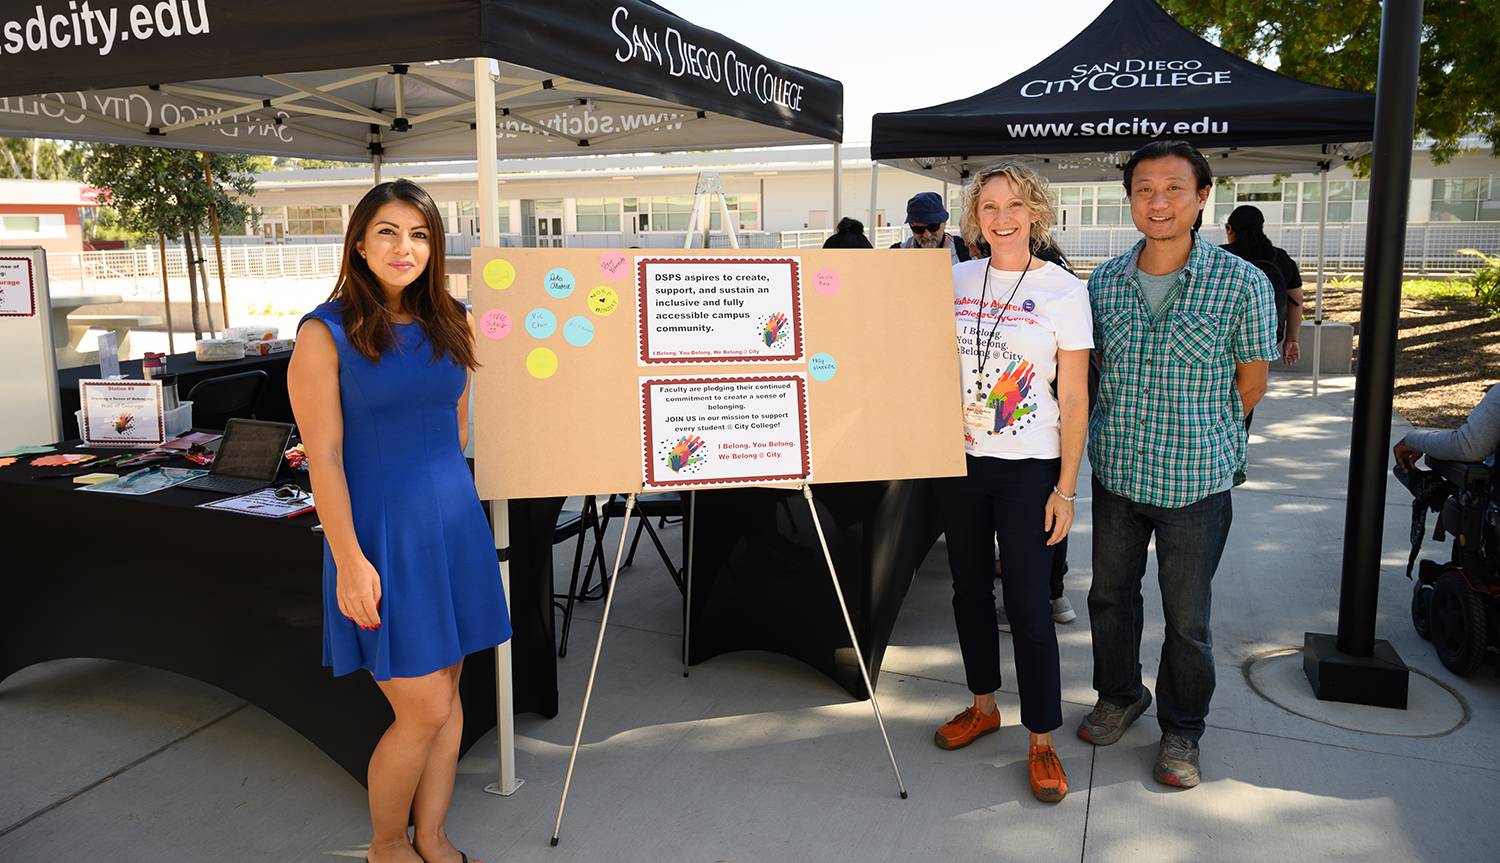 As a way to engage students, faculty and staff at City College host a disAbility Awareness booth. 